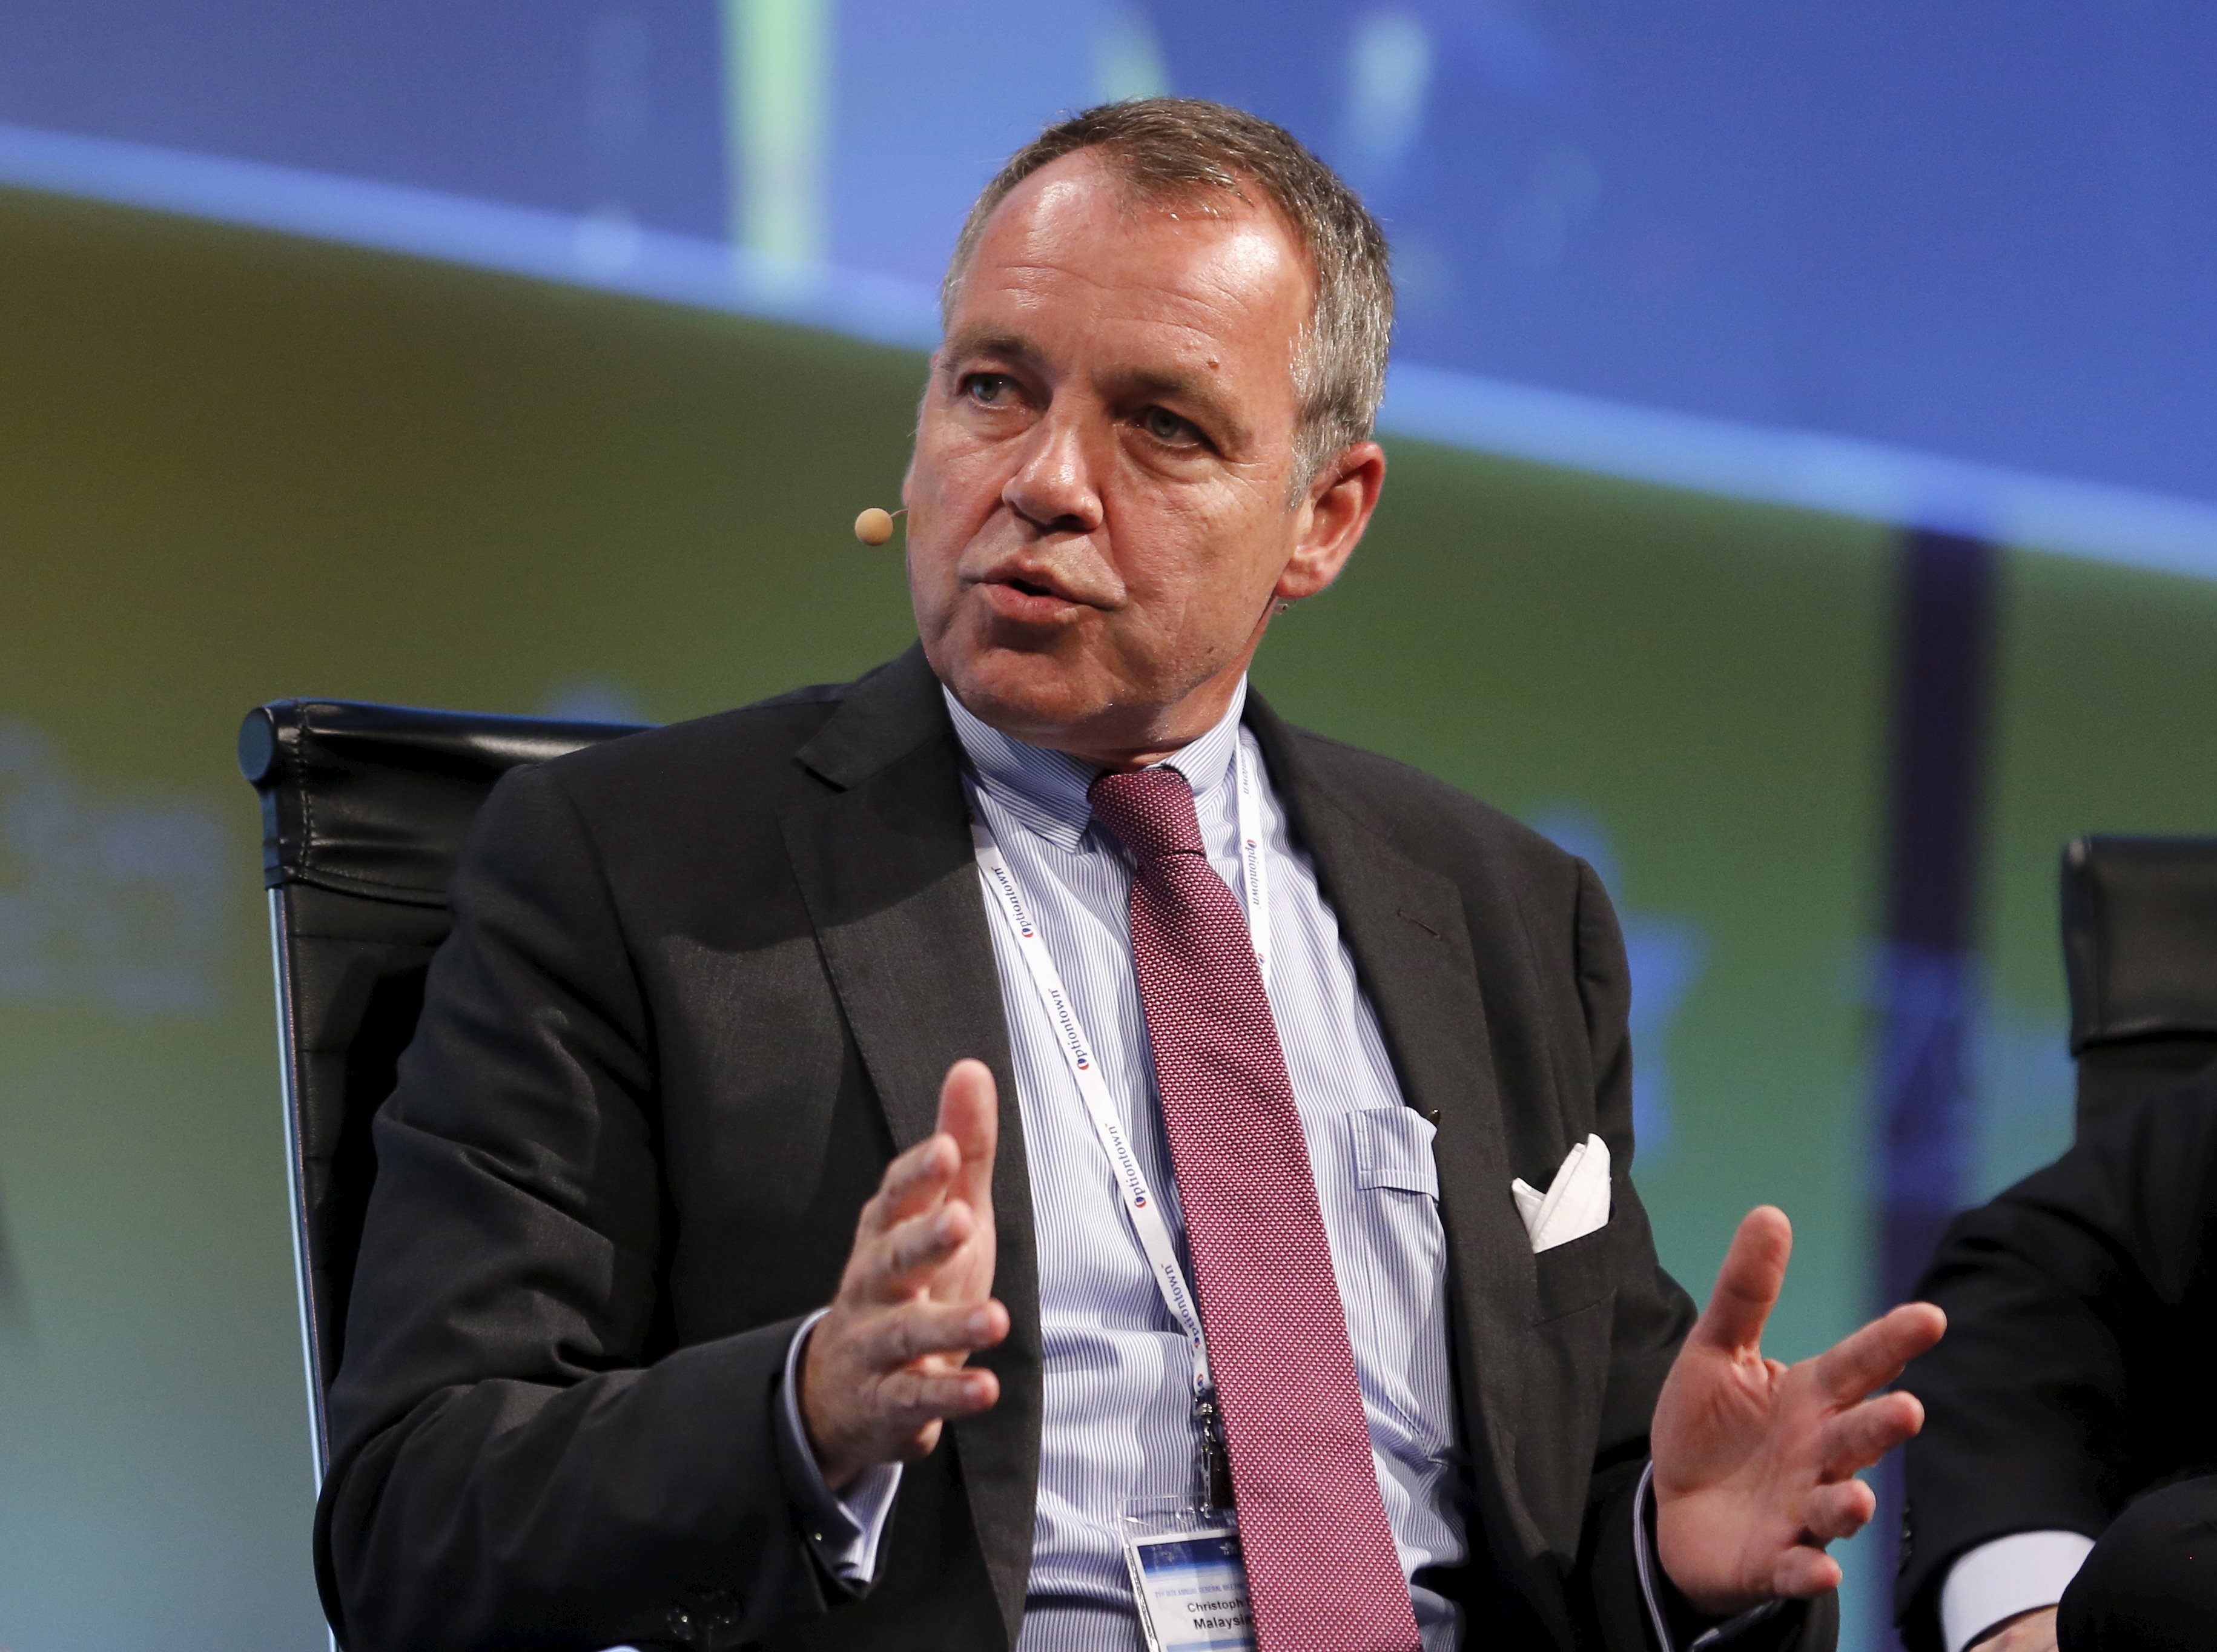 Christoph Mueller, CEO of Malaysia Airlines, speaks during a panel discussion at the 2015  International Air Transport Association (IATA) Annual General Meeting and World Air Transport Summit in Miami Beach on June 8, 2015 (Joe Skipper—Reuters)